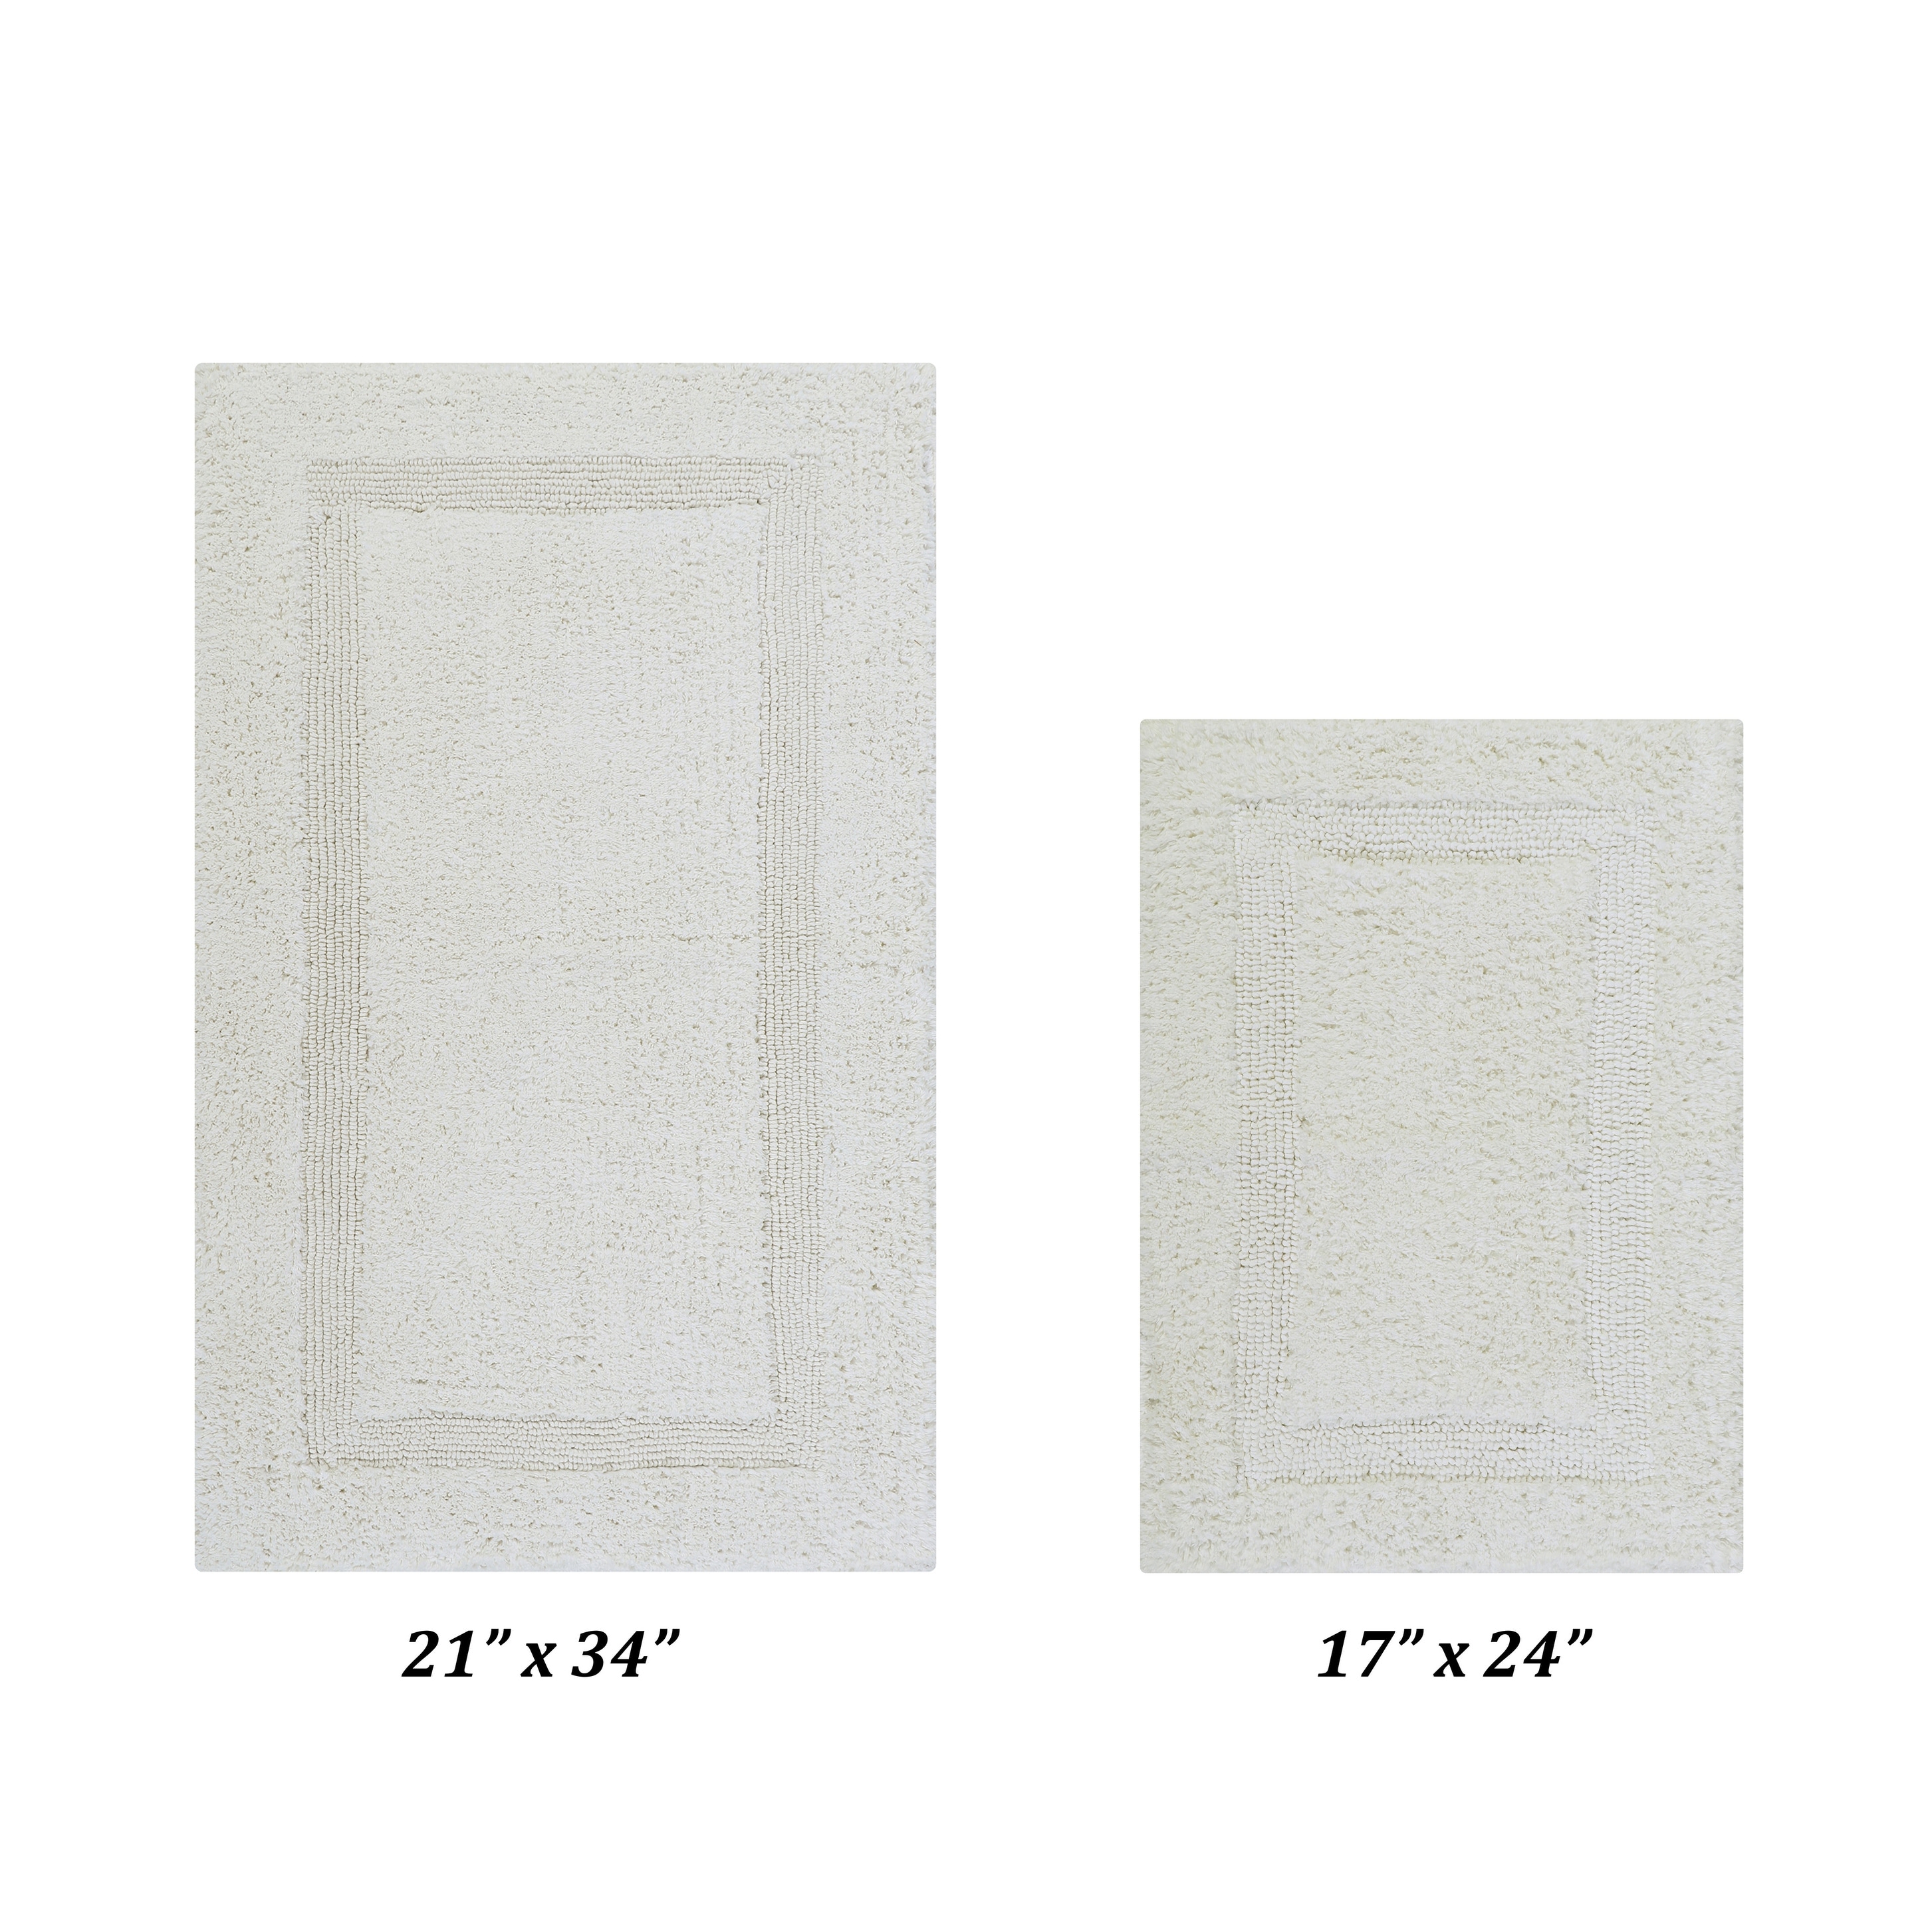 https://ak1.ostkcdn.com/images/products/is/images/direct/720301c95e39853e7e7971c792a6b55536adb15f/Better-Trends-Lux-Reversible-Bath-Rug-Rug-100%25-Cotton-Tufted.jpg